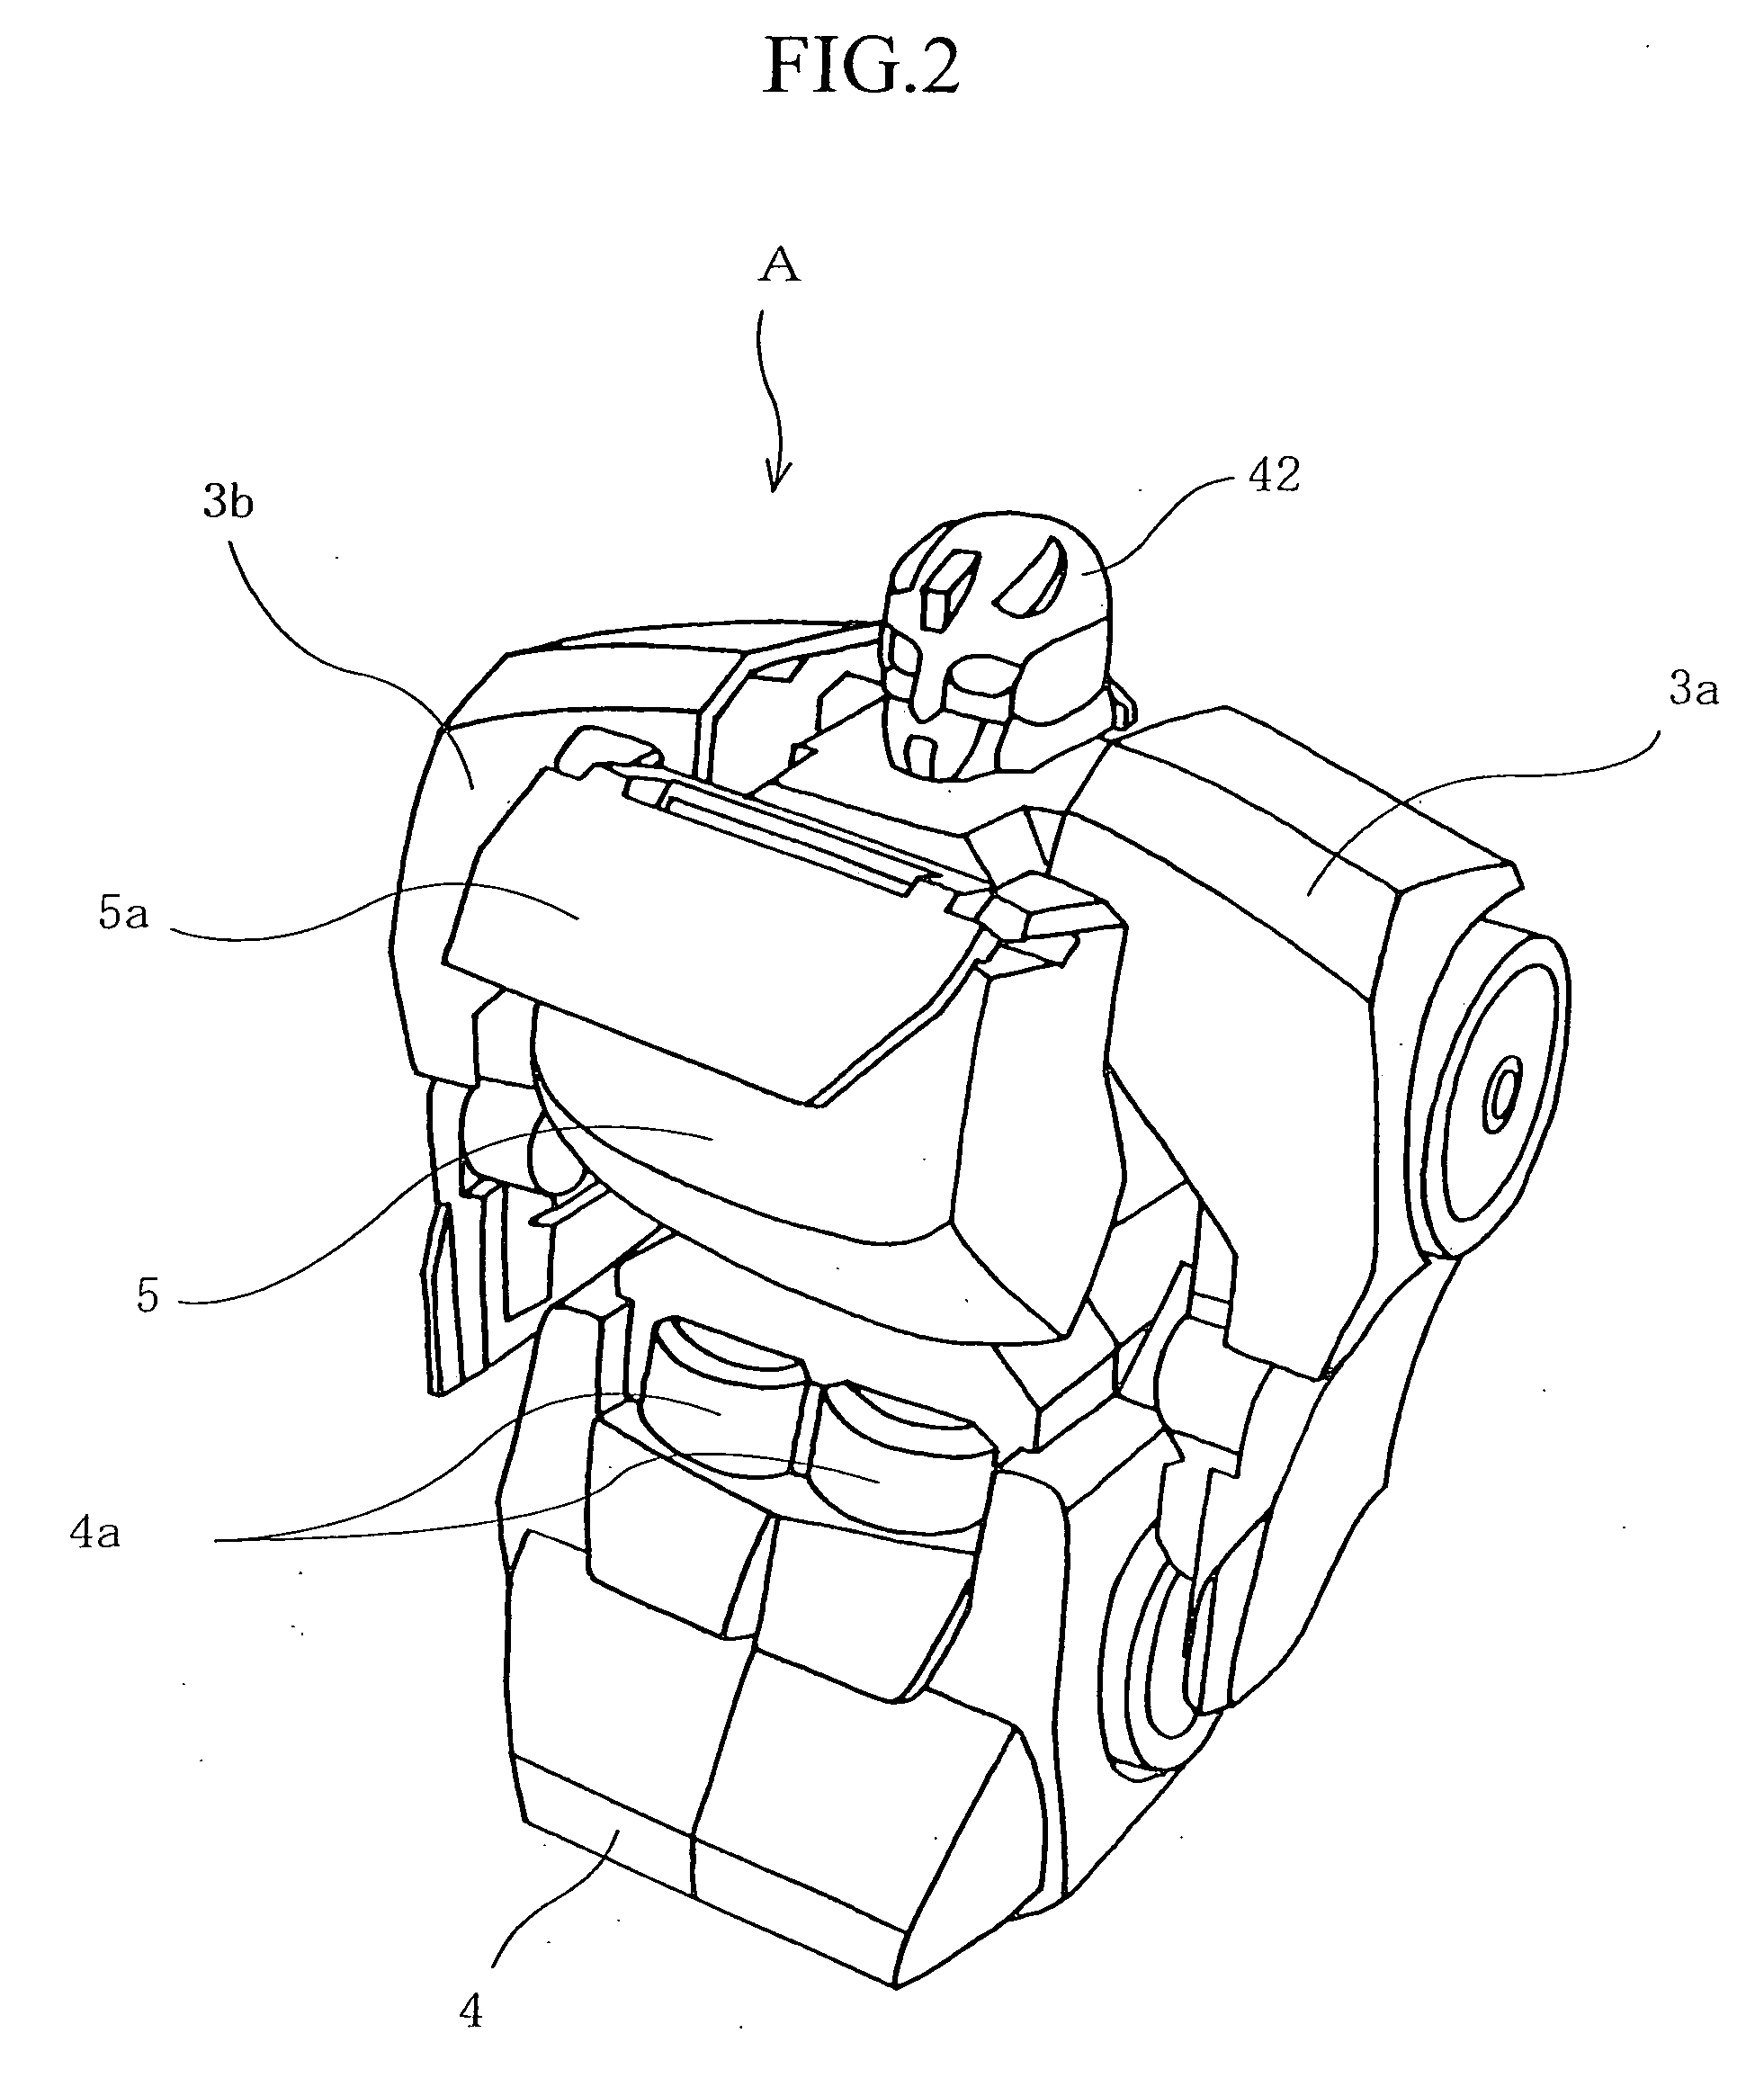 Transformable toy, and accommodating case for accommodating the transformable toy